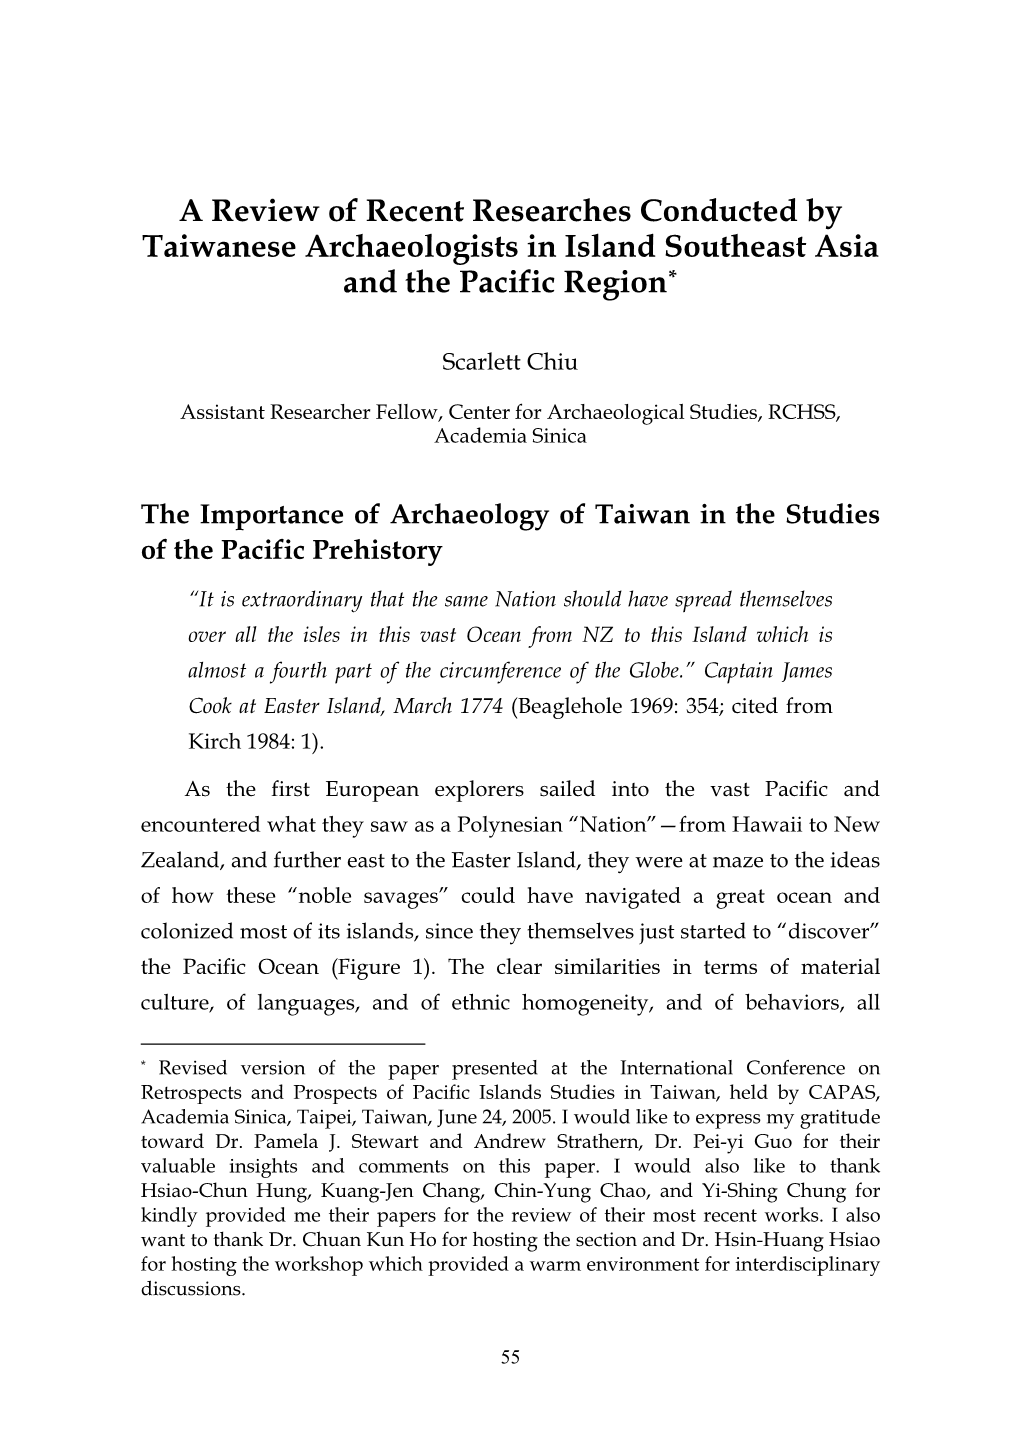 A Review of Recent Researches Conducted by Taiwanese Archaeologists in Island Southeast Asia and the Pacific Region*